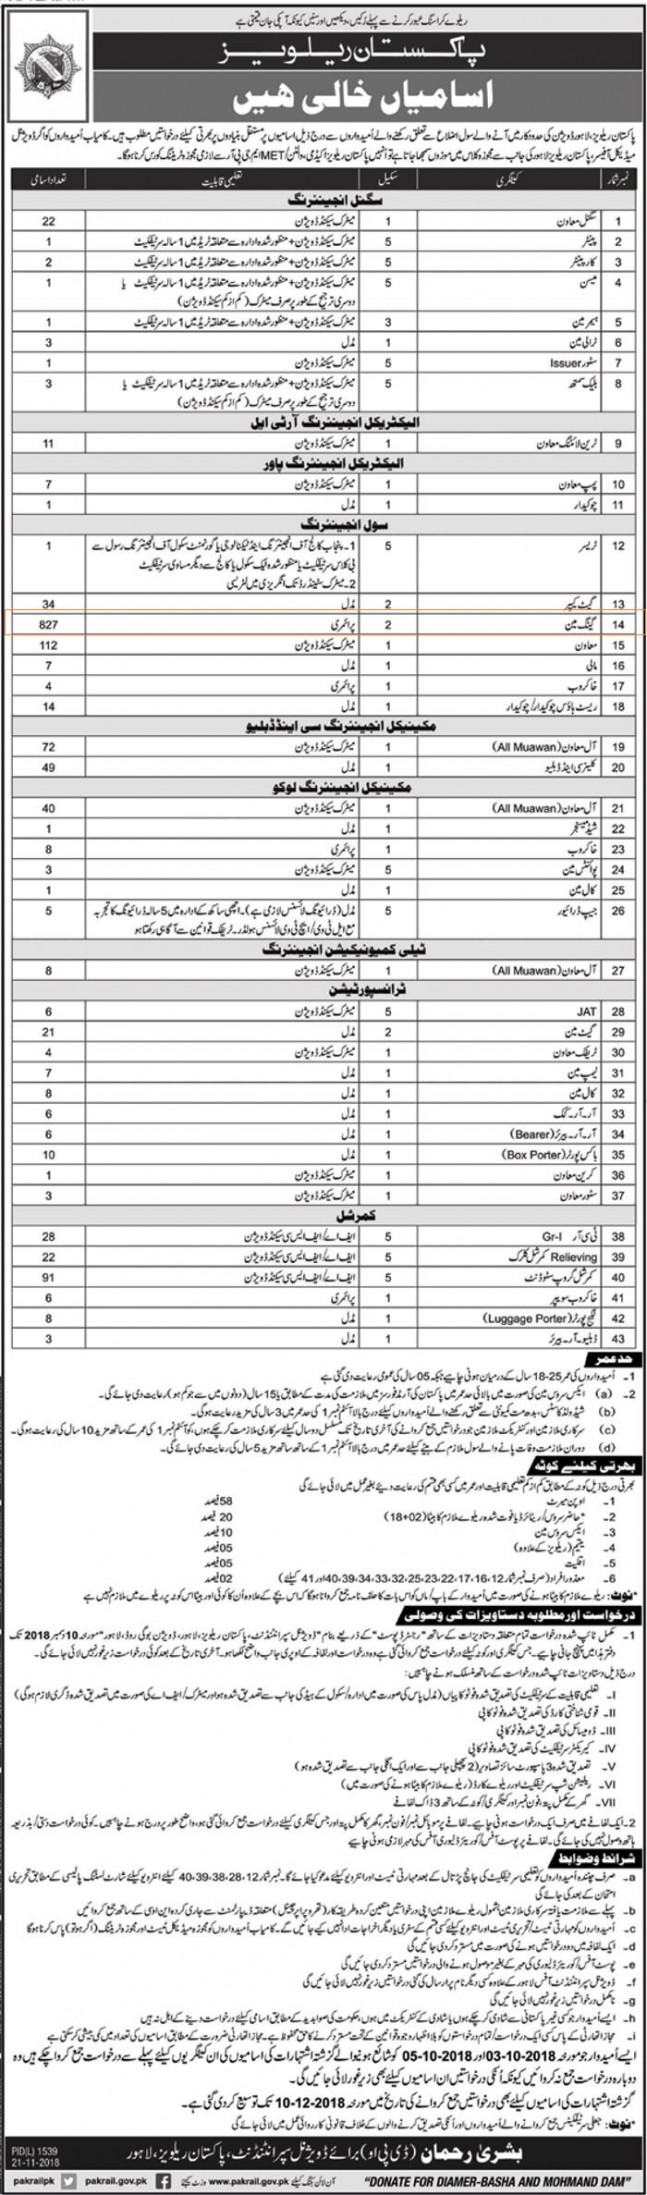 Pakistan Railway Latest Jobs Advertisement of 1500 Positions in Civil, Mechanical, Electrical and other department 2018